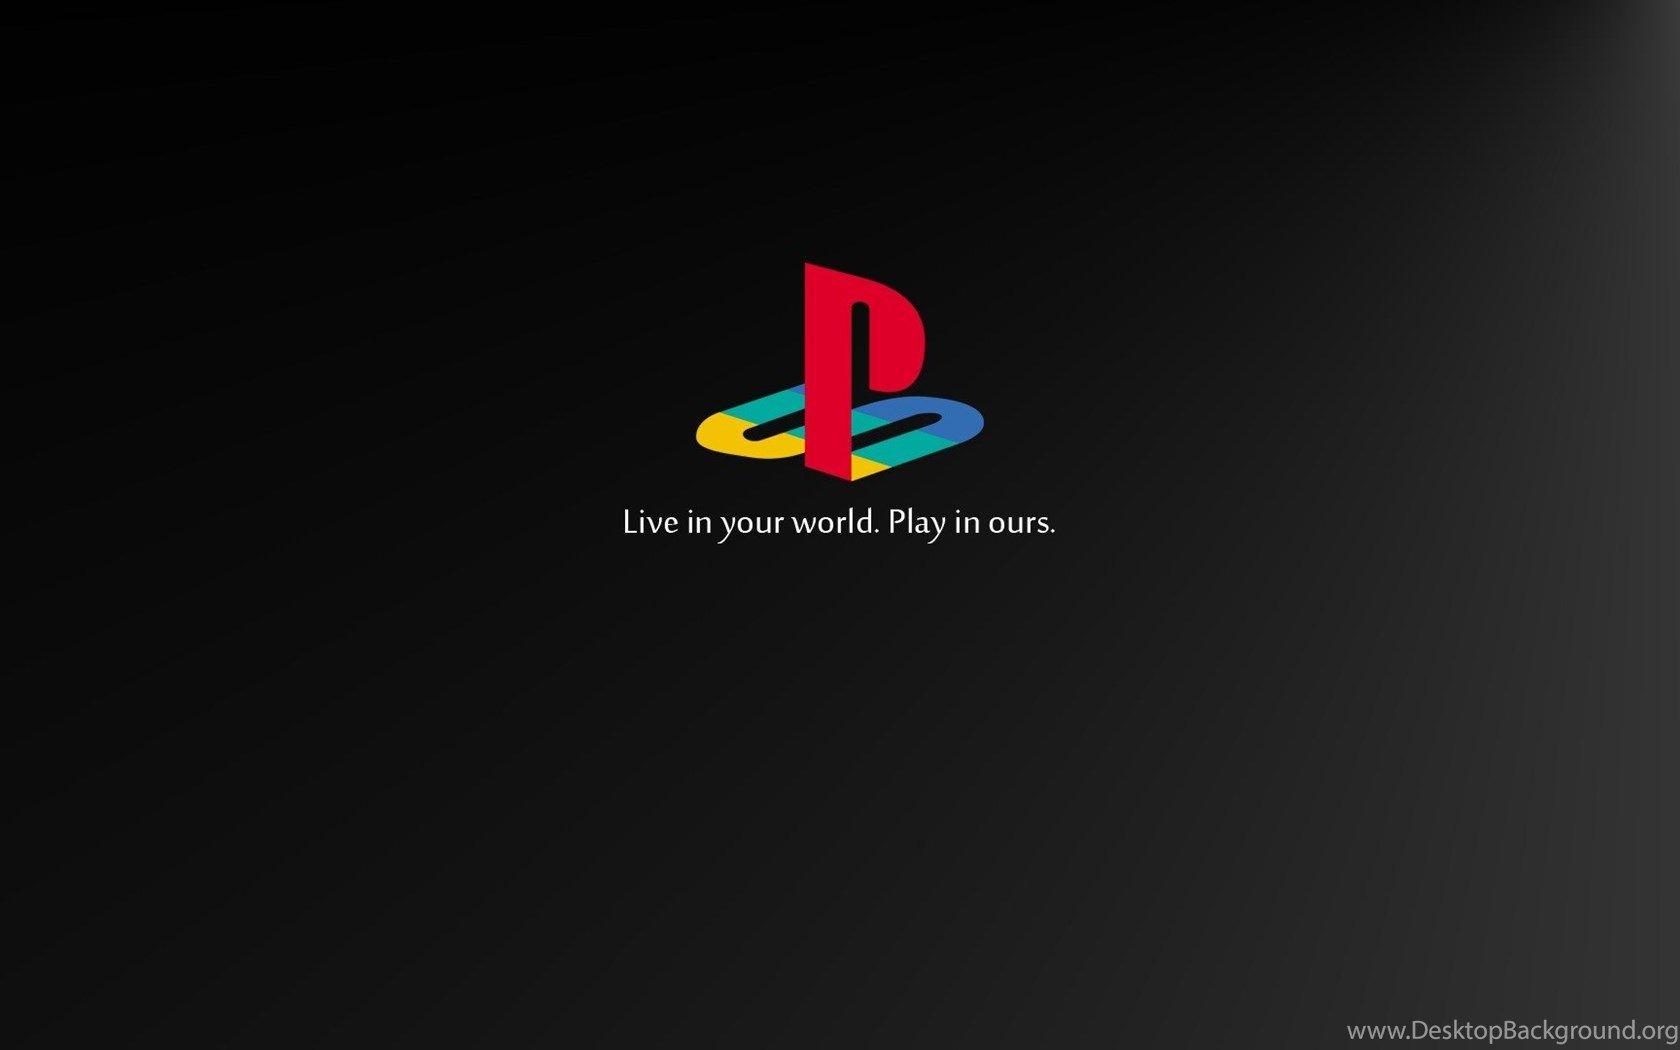 Ps3 Logo Wallpapers Top Free Ps3 Logo Backgrounds Wallpaperaccess